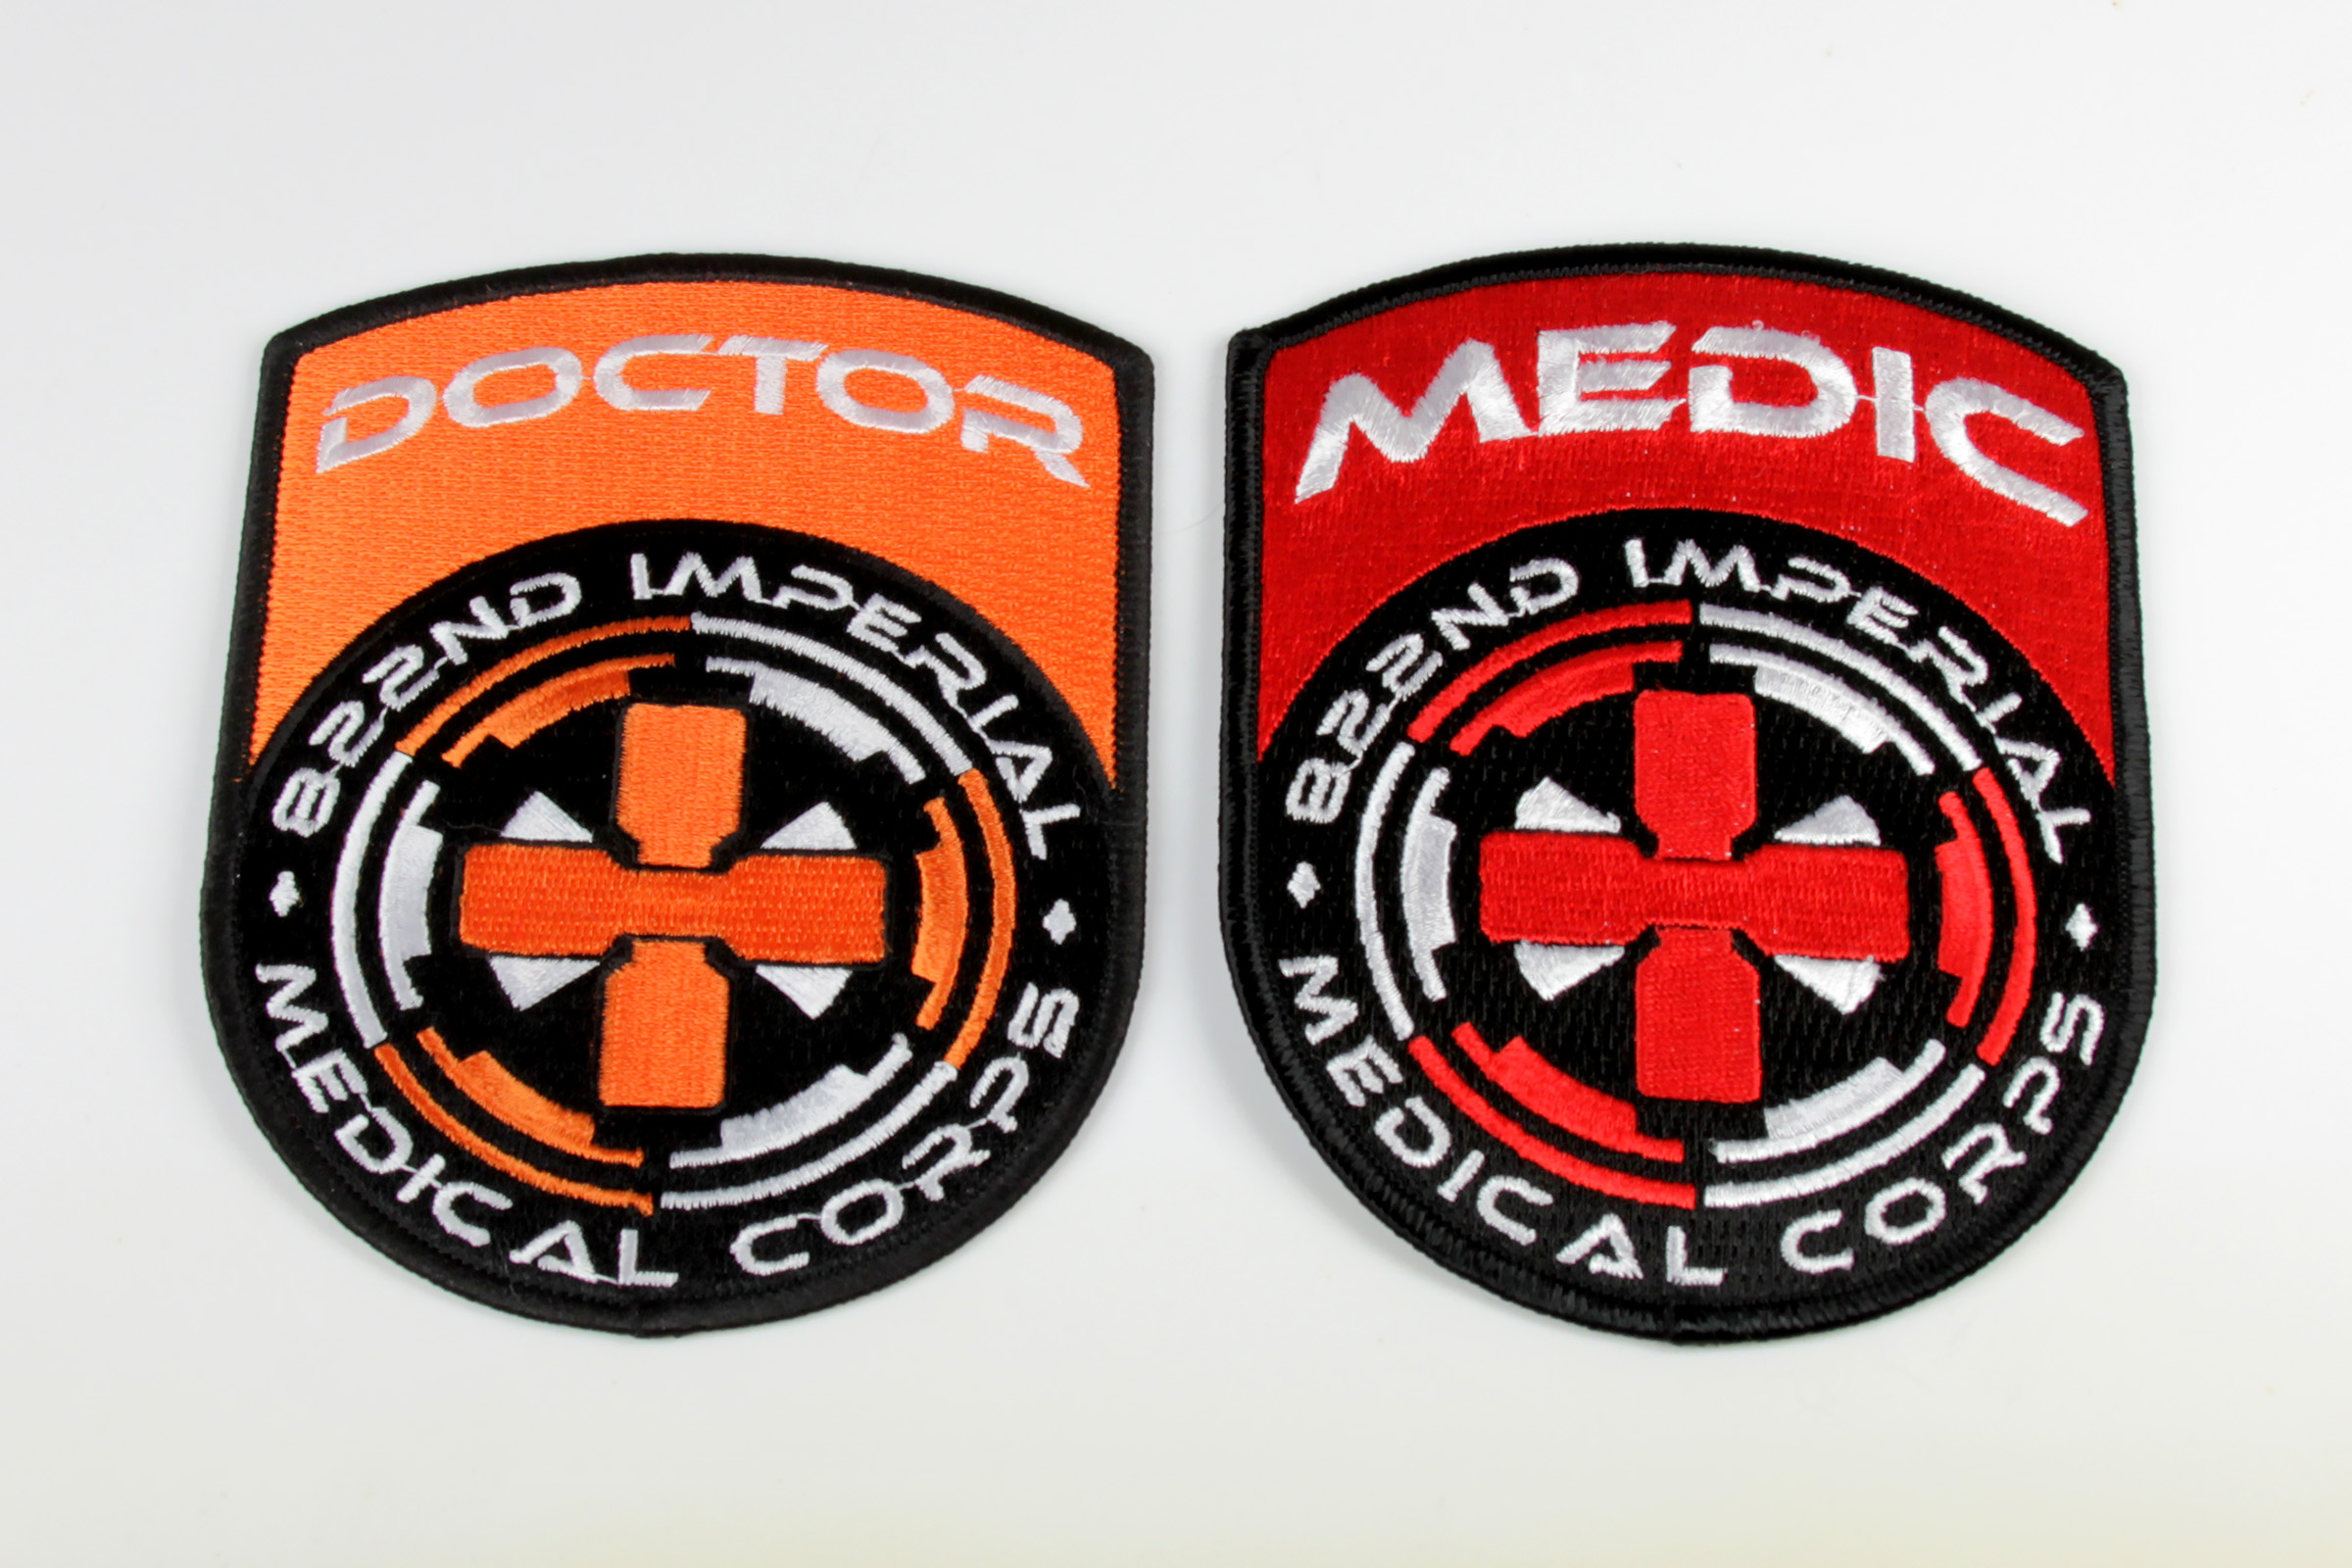 882nd Imperial Medical Corps Patches